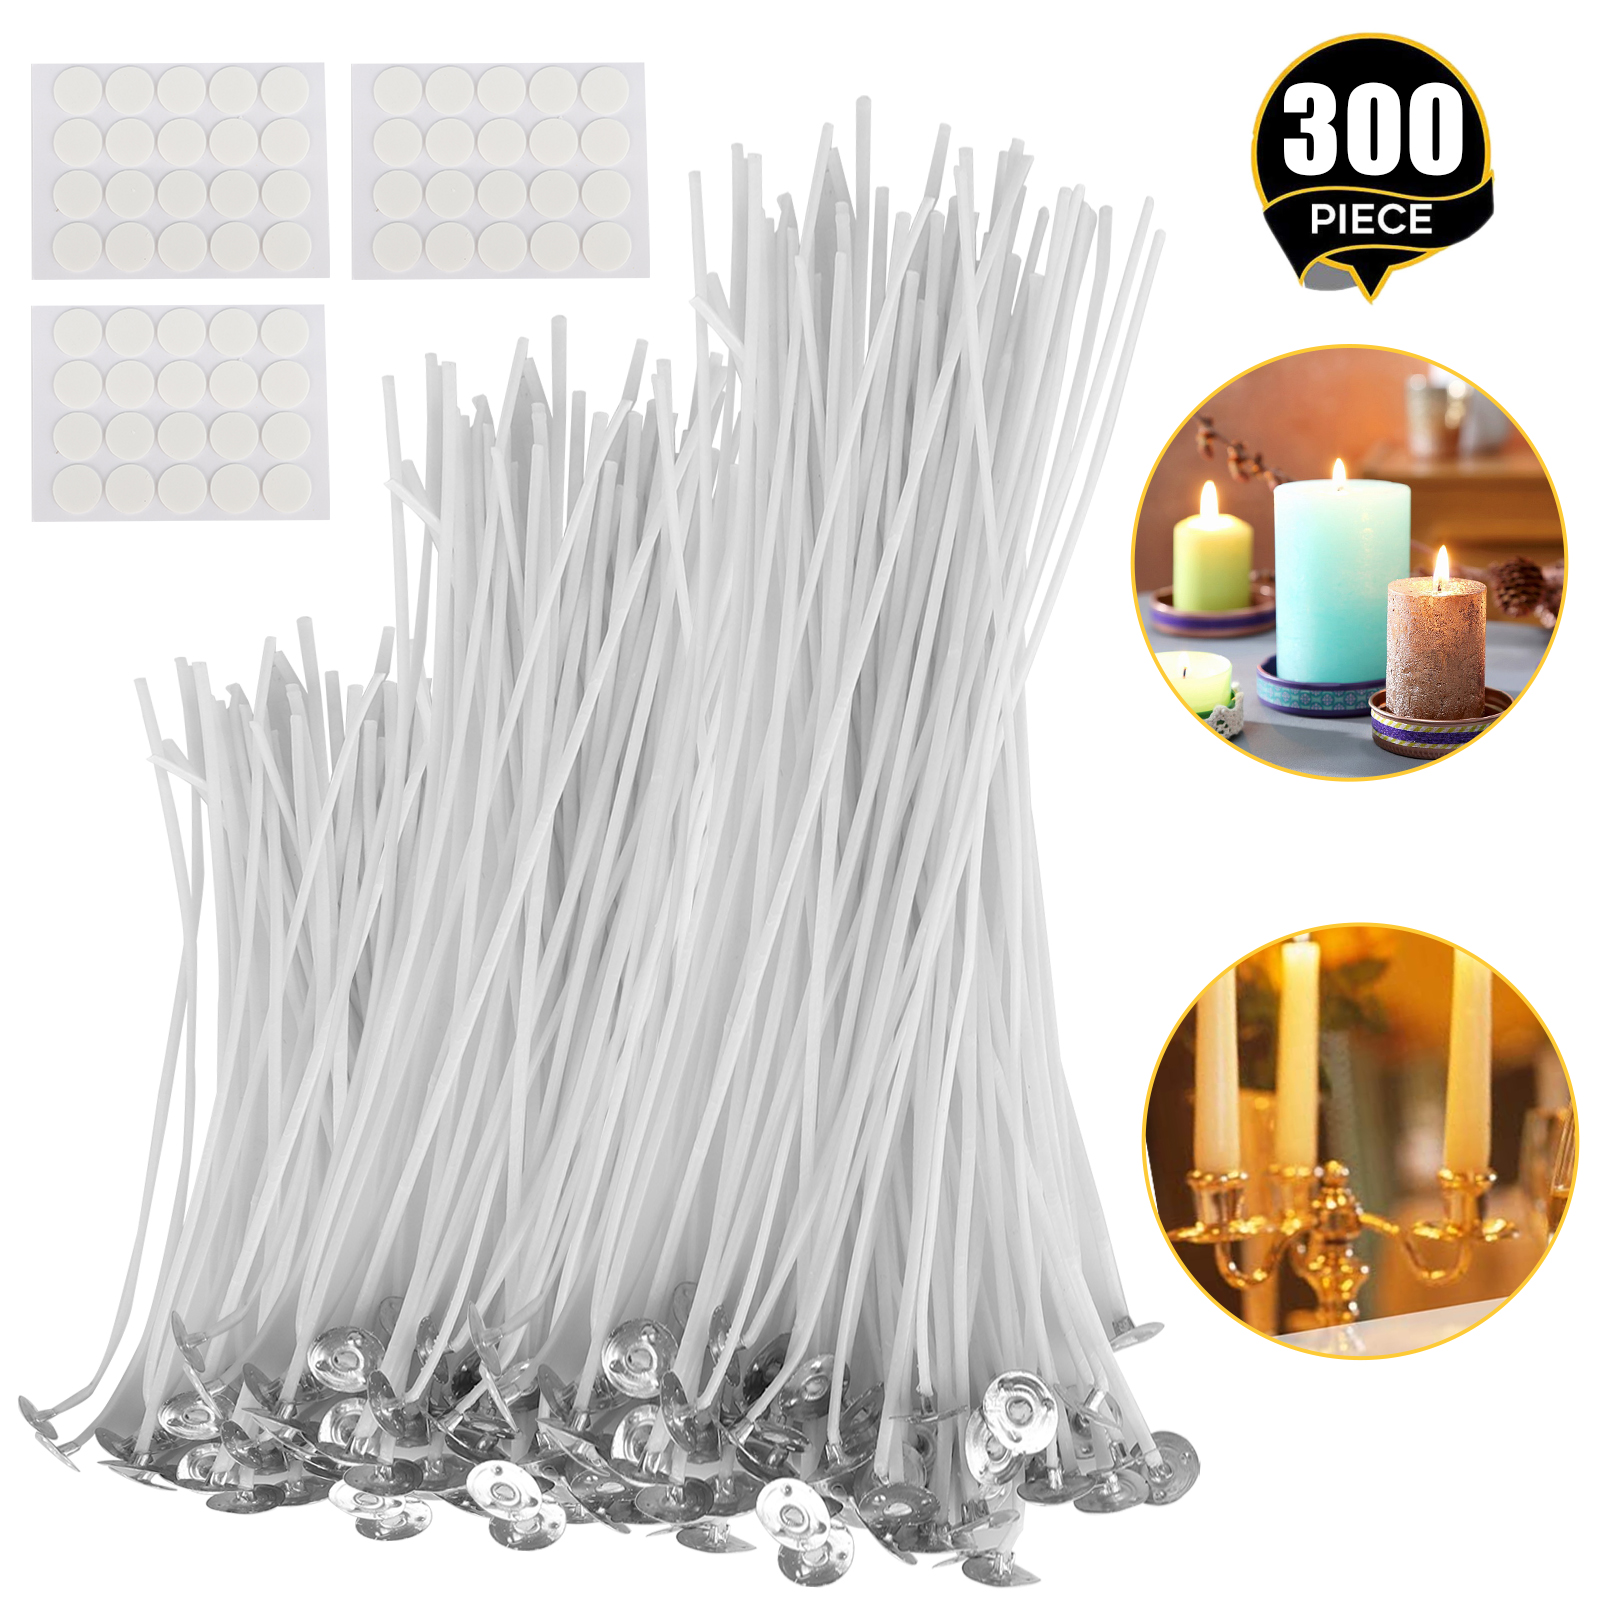 thumbnail 11 - 60/120 PCS 8 Inch Candle Wicks Pre-Waxed Wick For Cotton Core Candles DIY Making